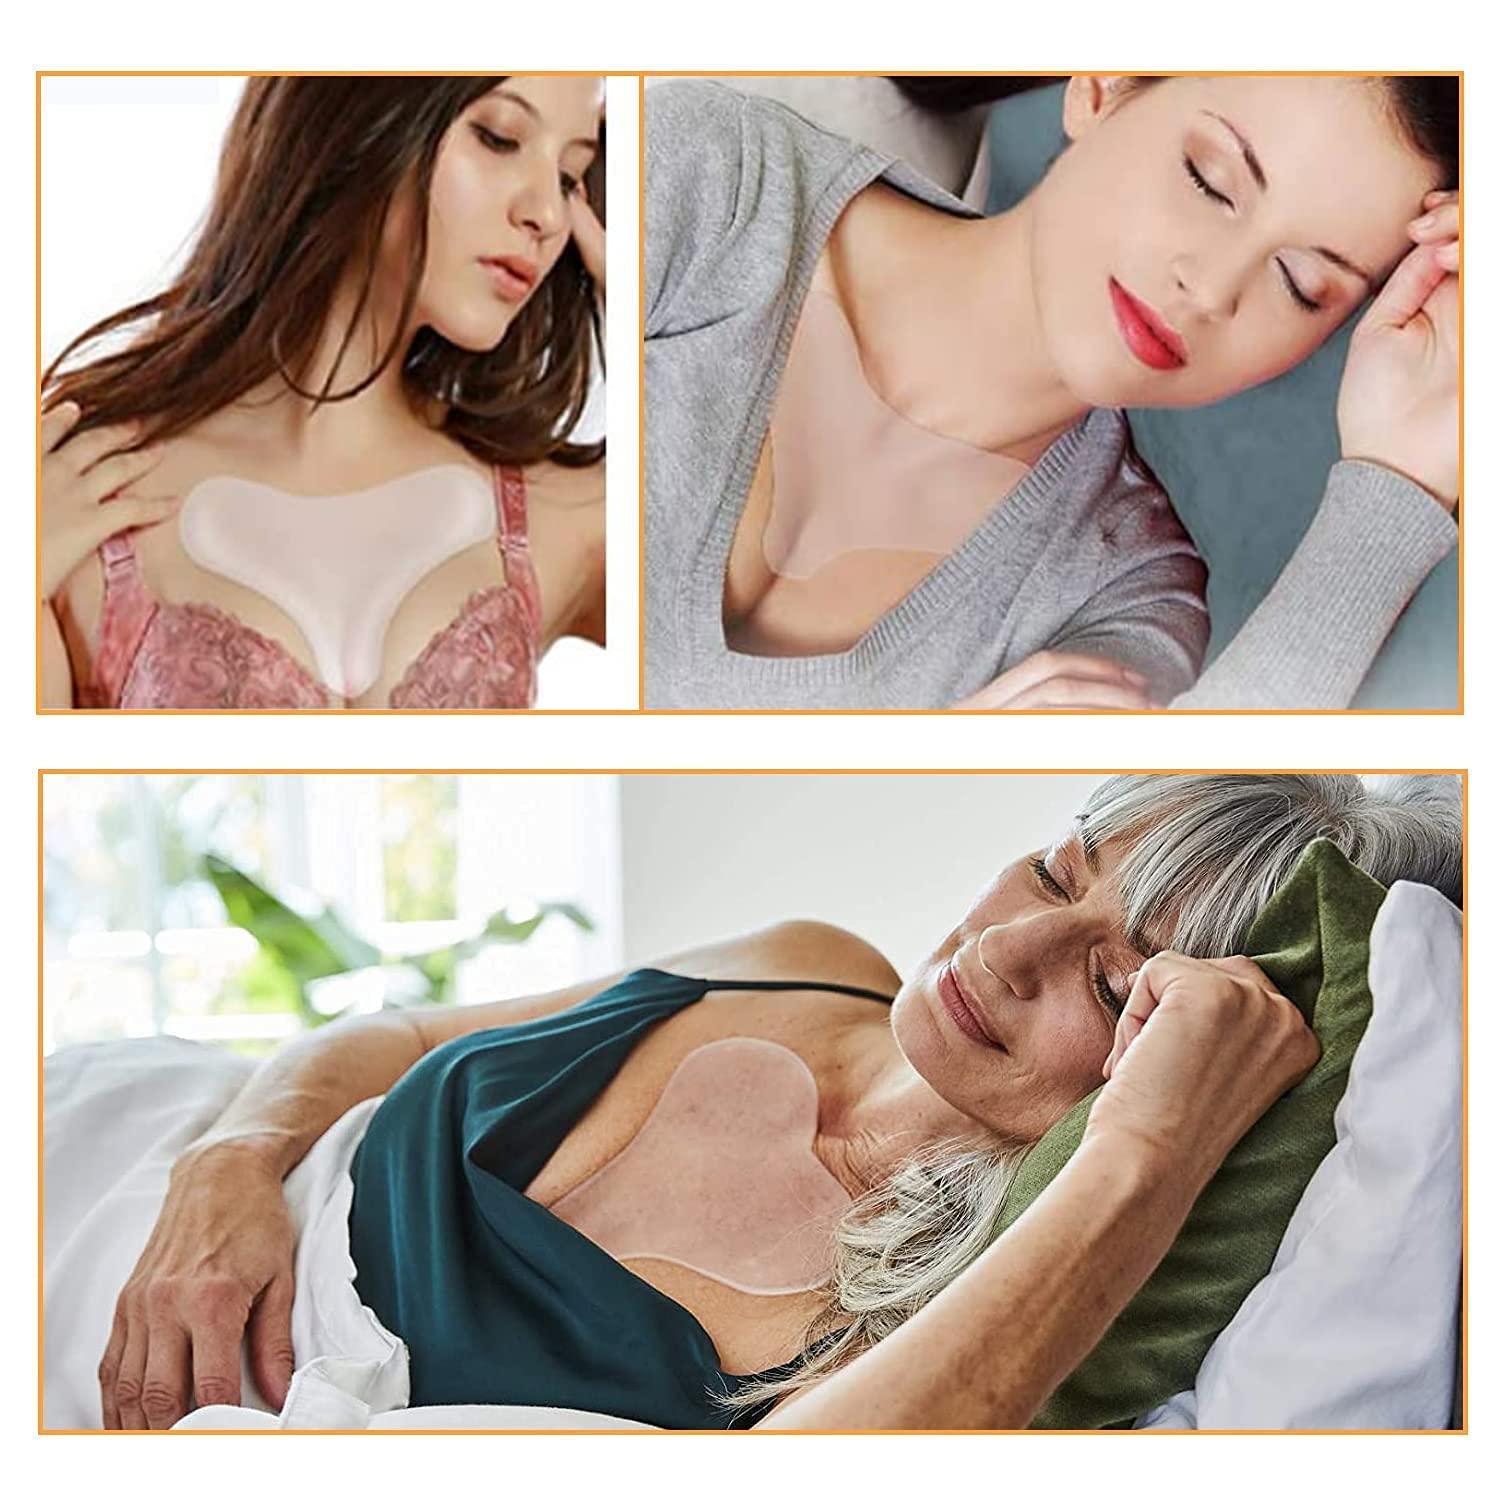 SLEEP & GLOW Pillow Bra Against Wrinkles Natural Silk with